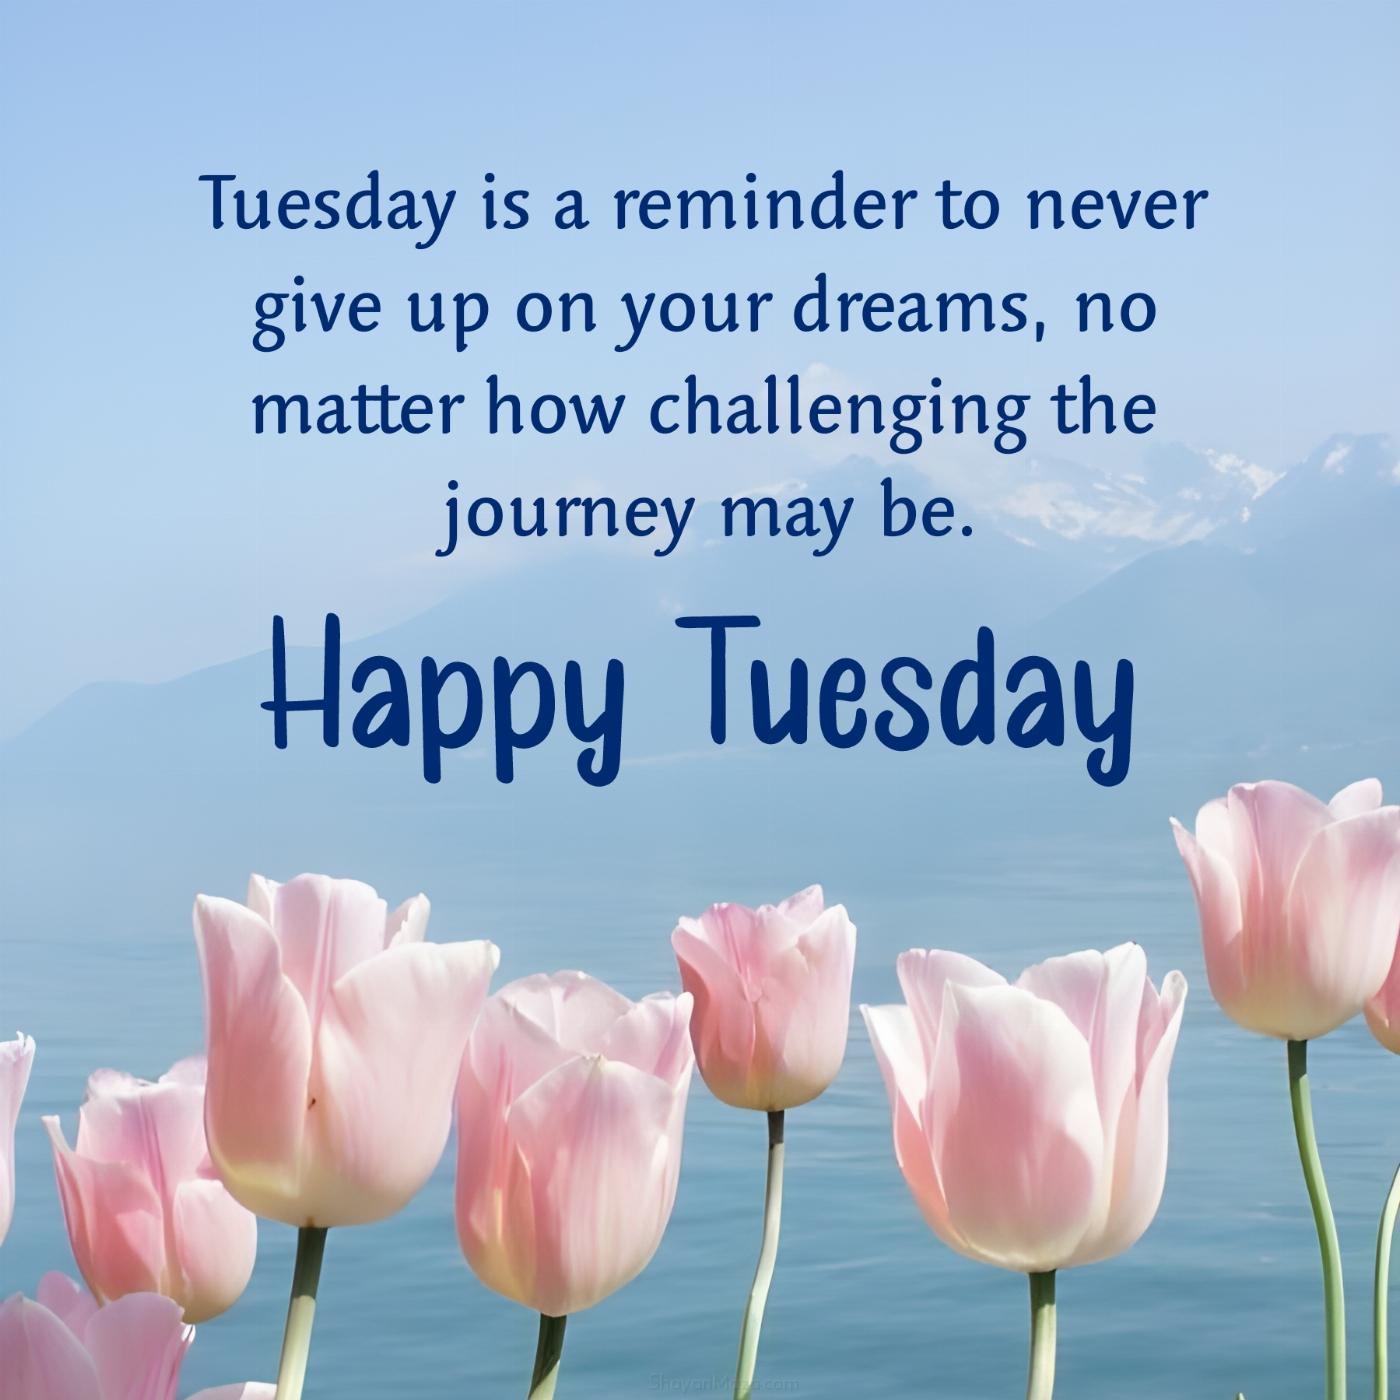 Tuesday is a reminder to never give up on your dreams